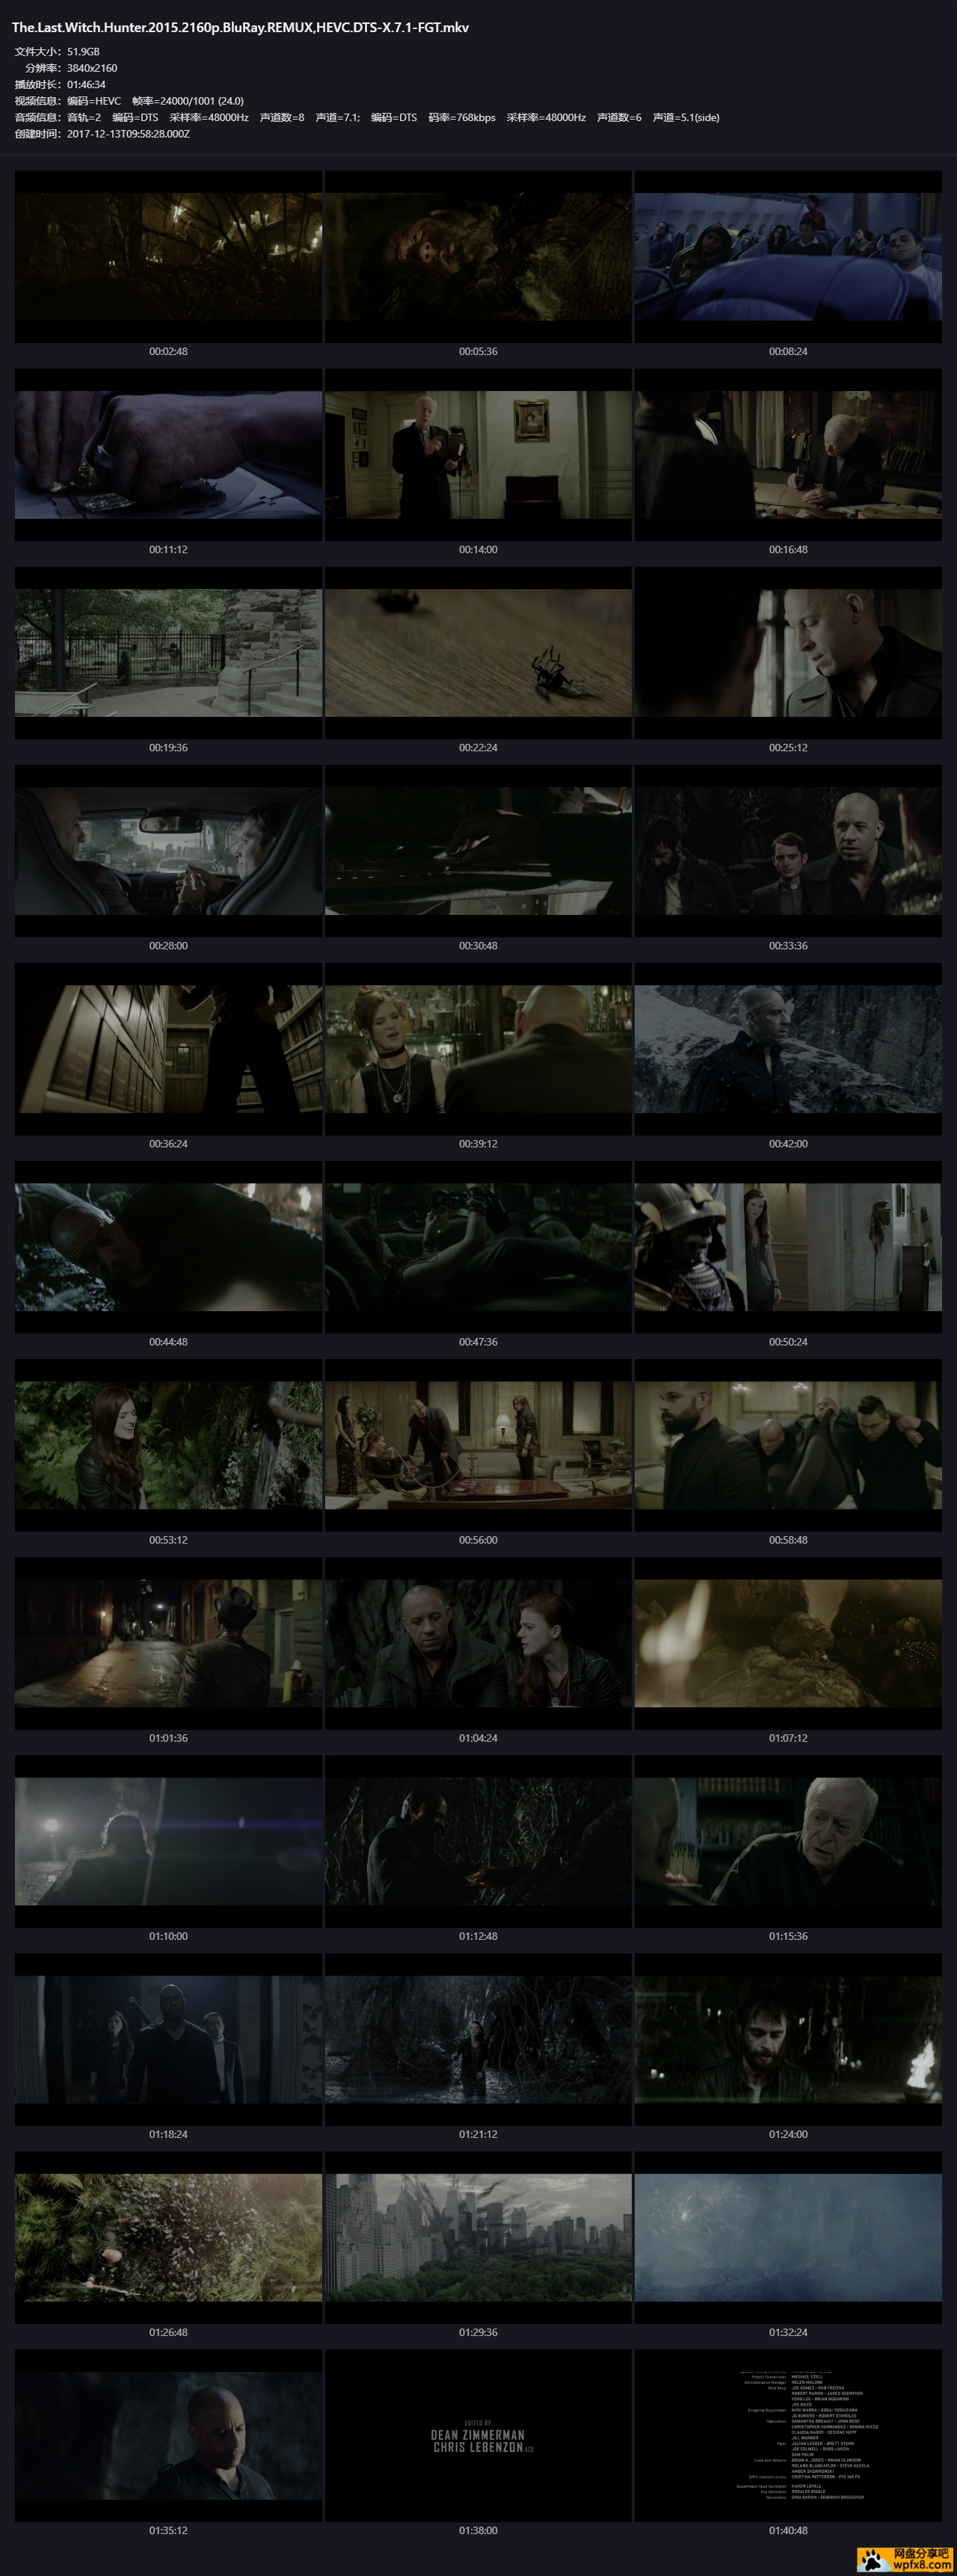 The.Last.Witch.Hunter.2015.2160p.BluRay.REMUX,HEVC.DTS-X.7.1-FGT.mkv_1280.png